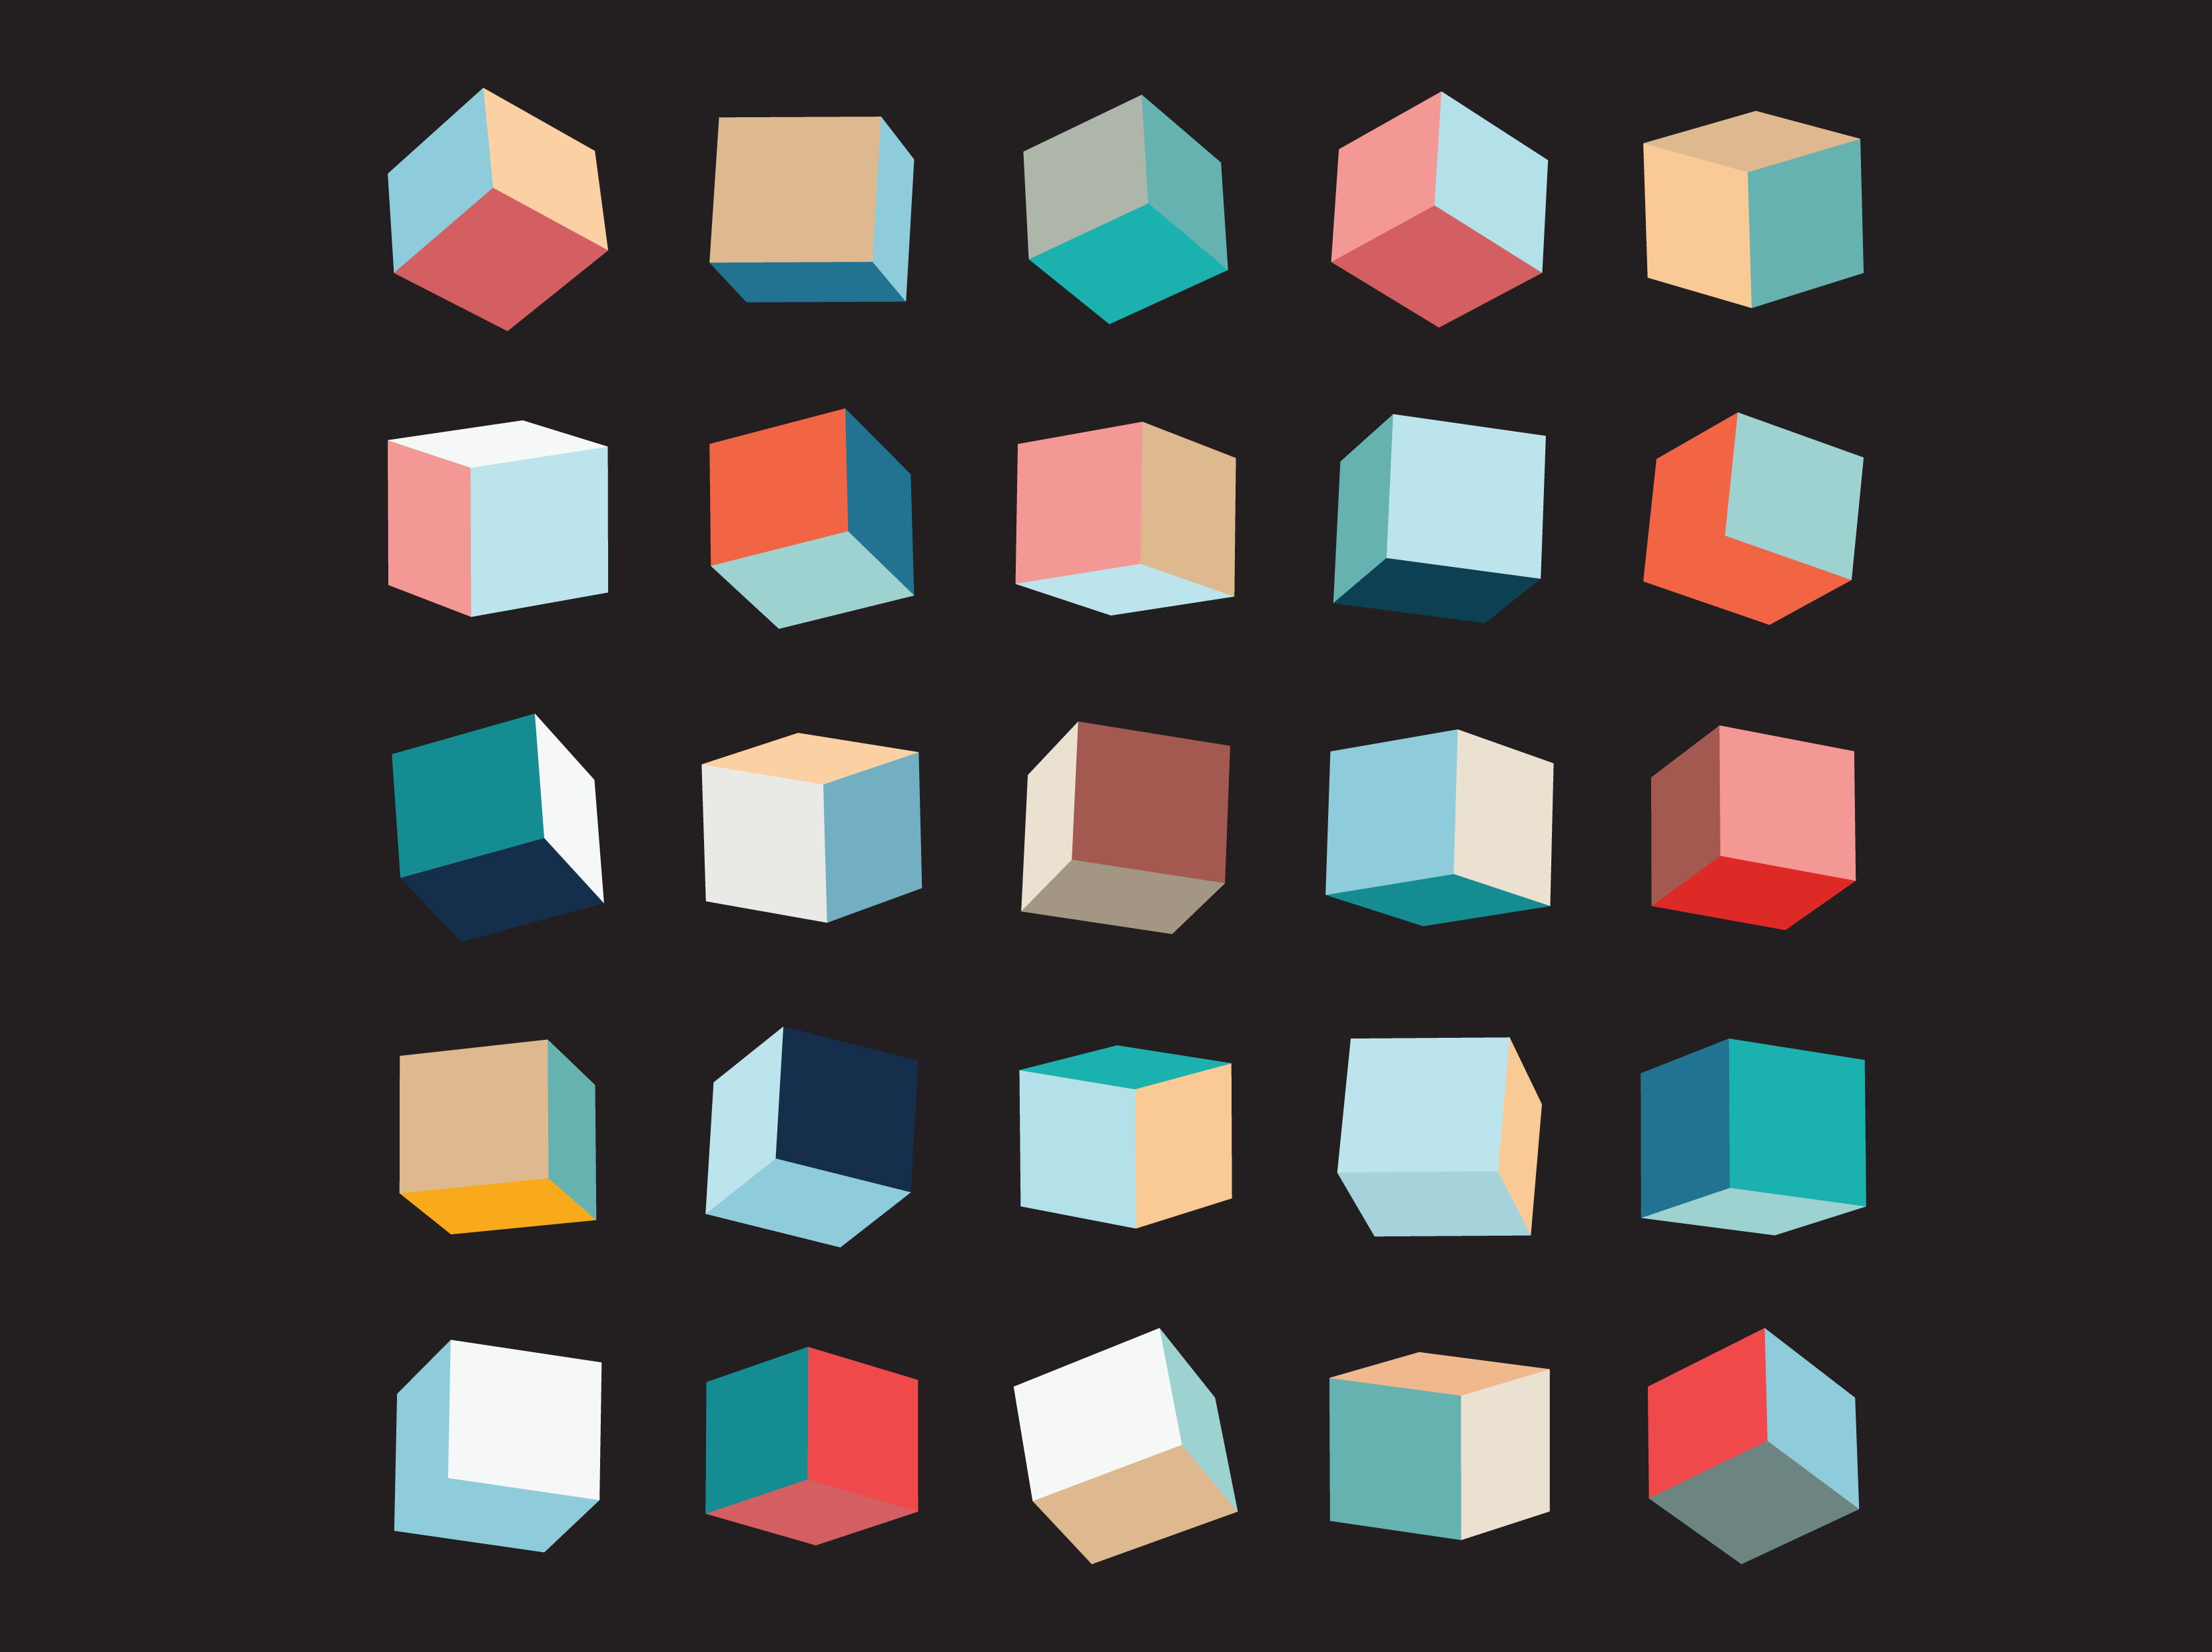 A loose grid of same-sized colored cubes, at different angles, representing data comparison.